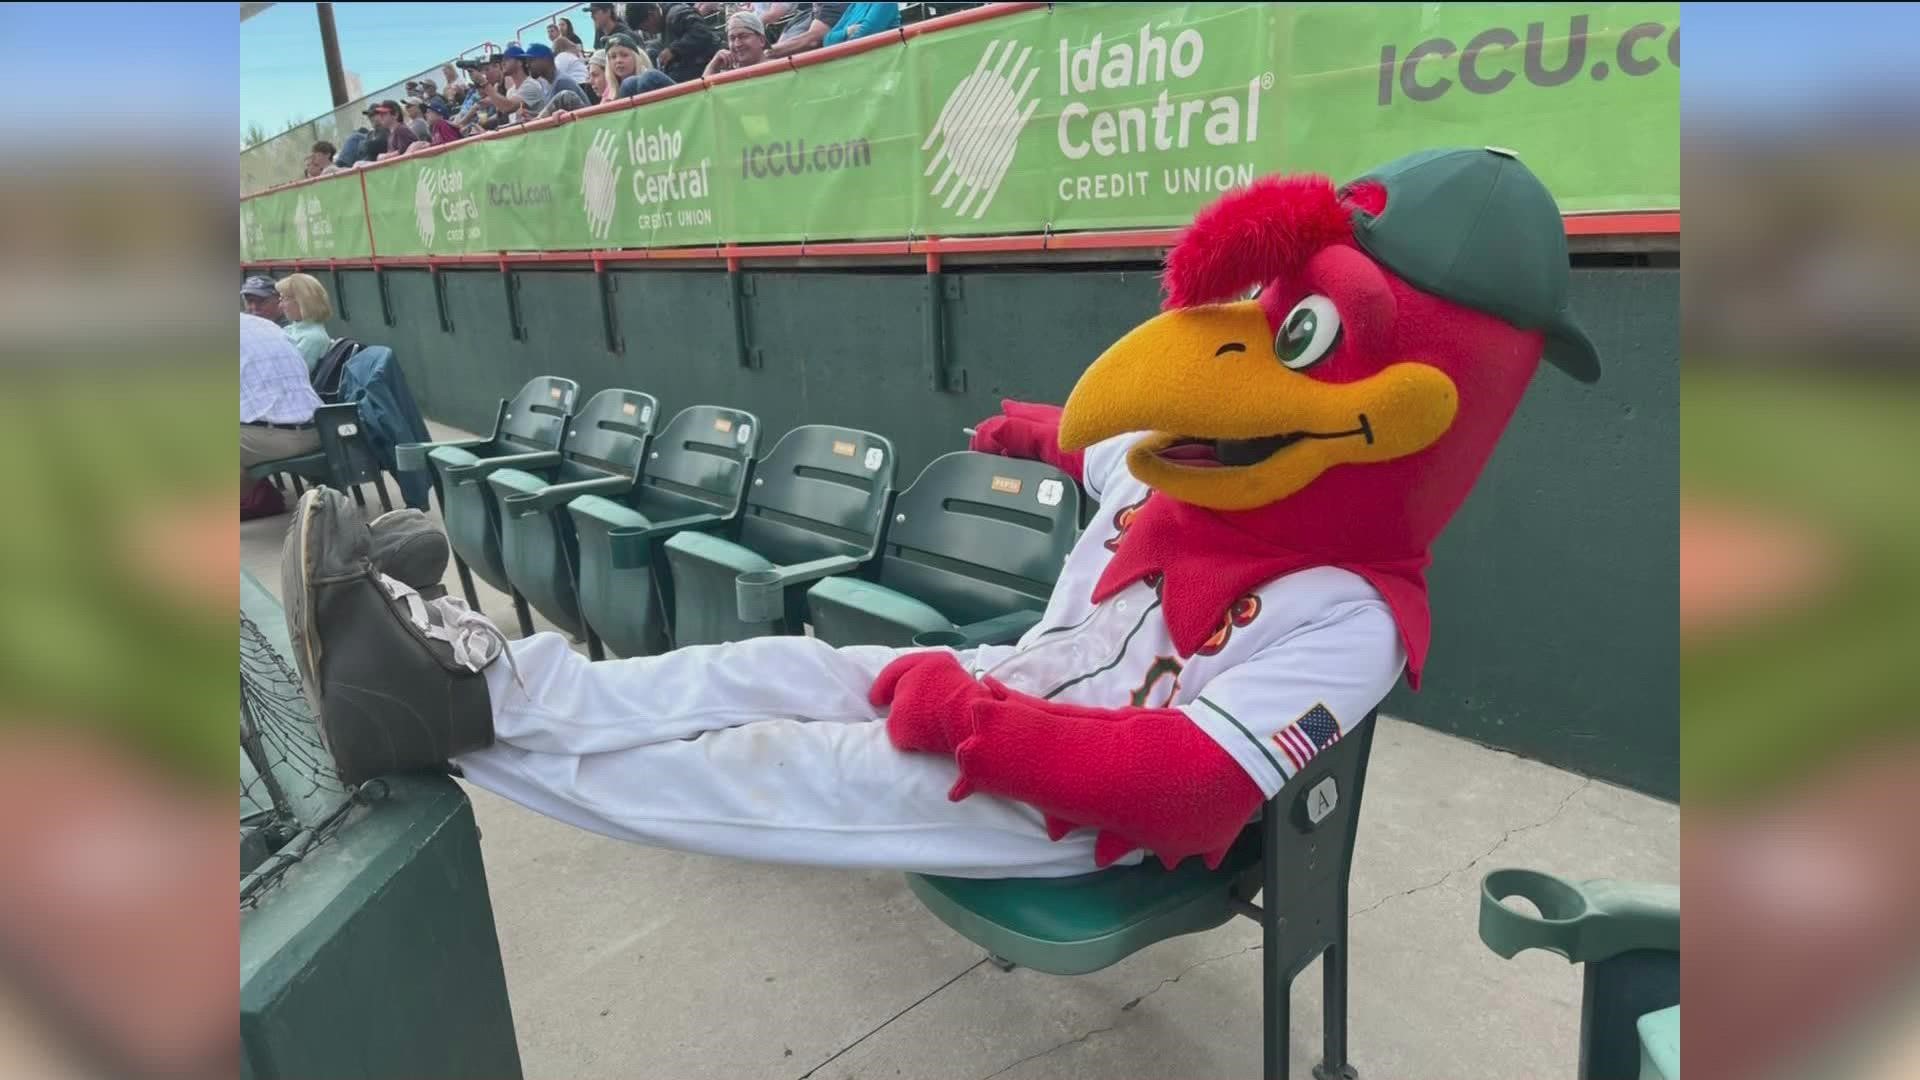 On June 29 1989, Boise Hawks baseball manager Mal Fichman returned to the field after getting ejected, but this time disguised as the team mascot.